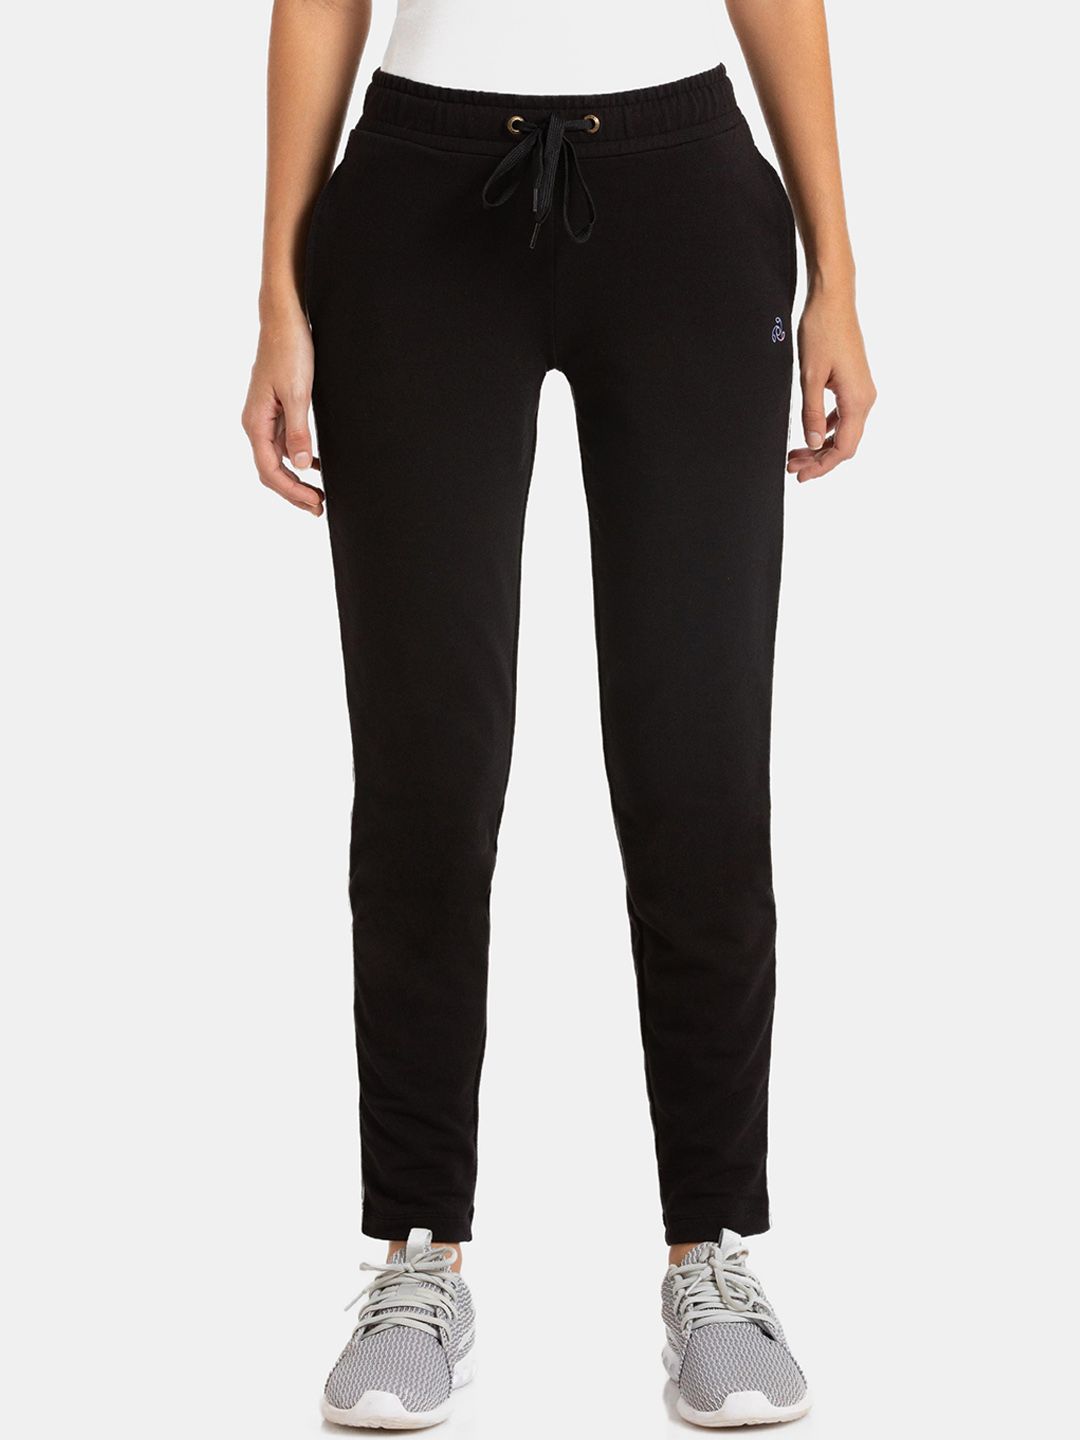 Jockey Women Black Solid Straight-Fit Track Pants Price in India